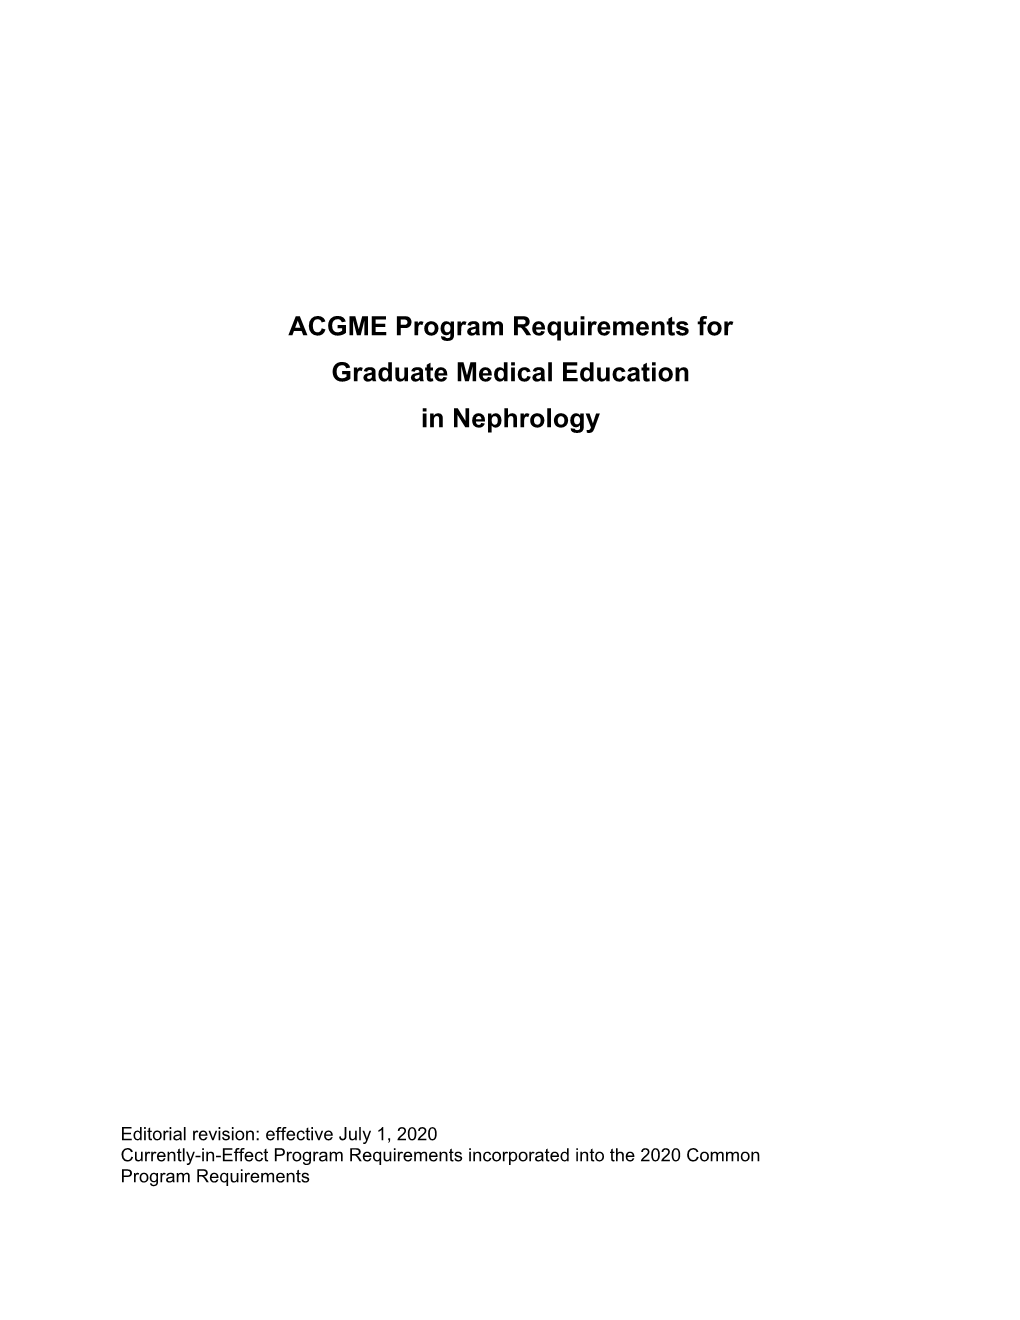 ACGME Program Requirements for Graduate Medical Education in Nephrology